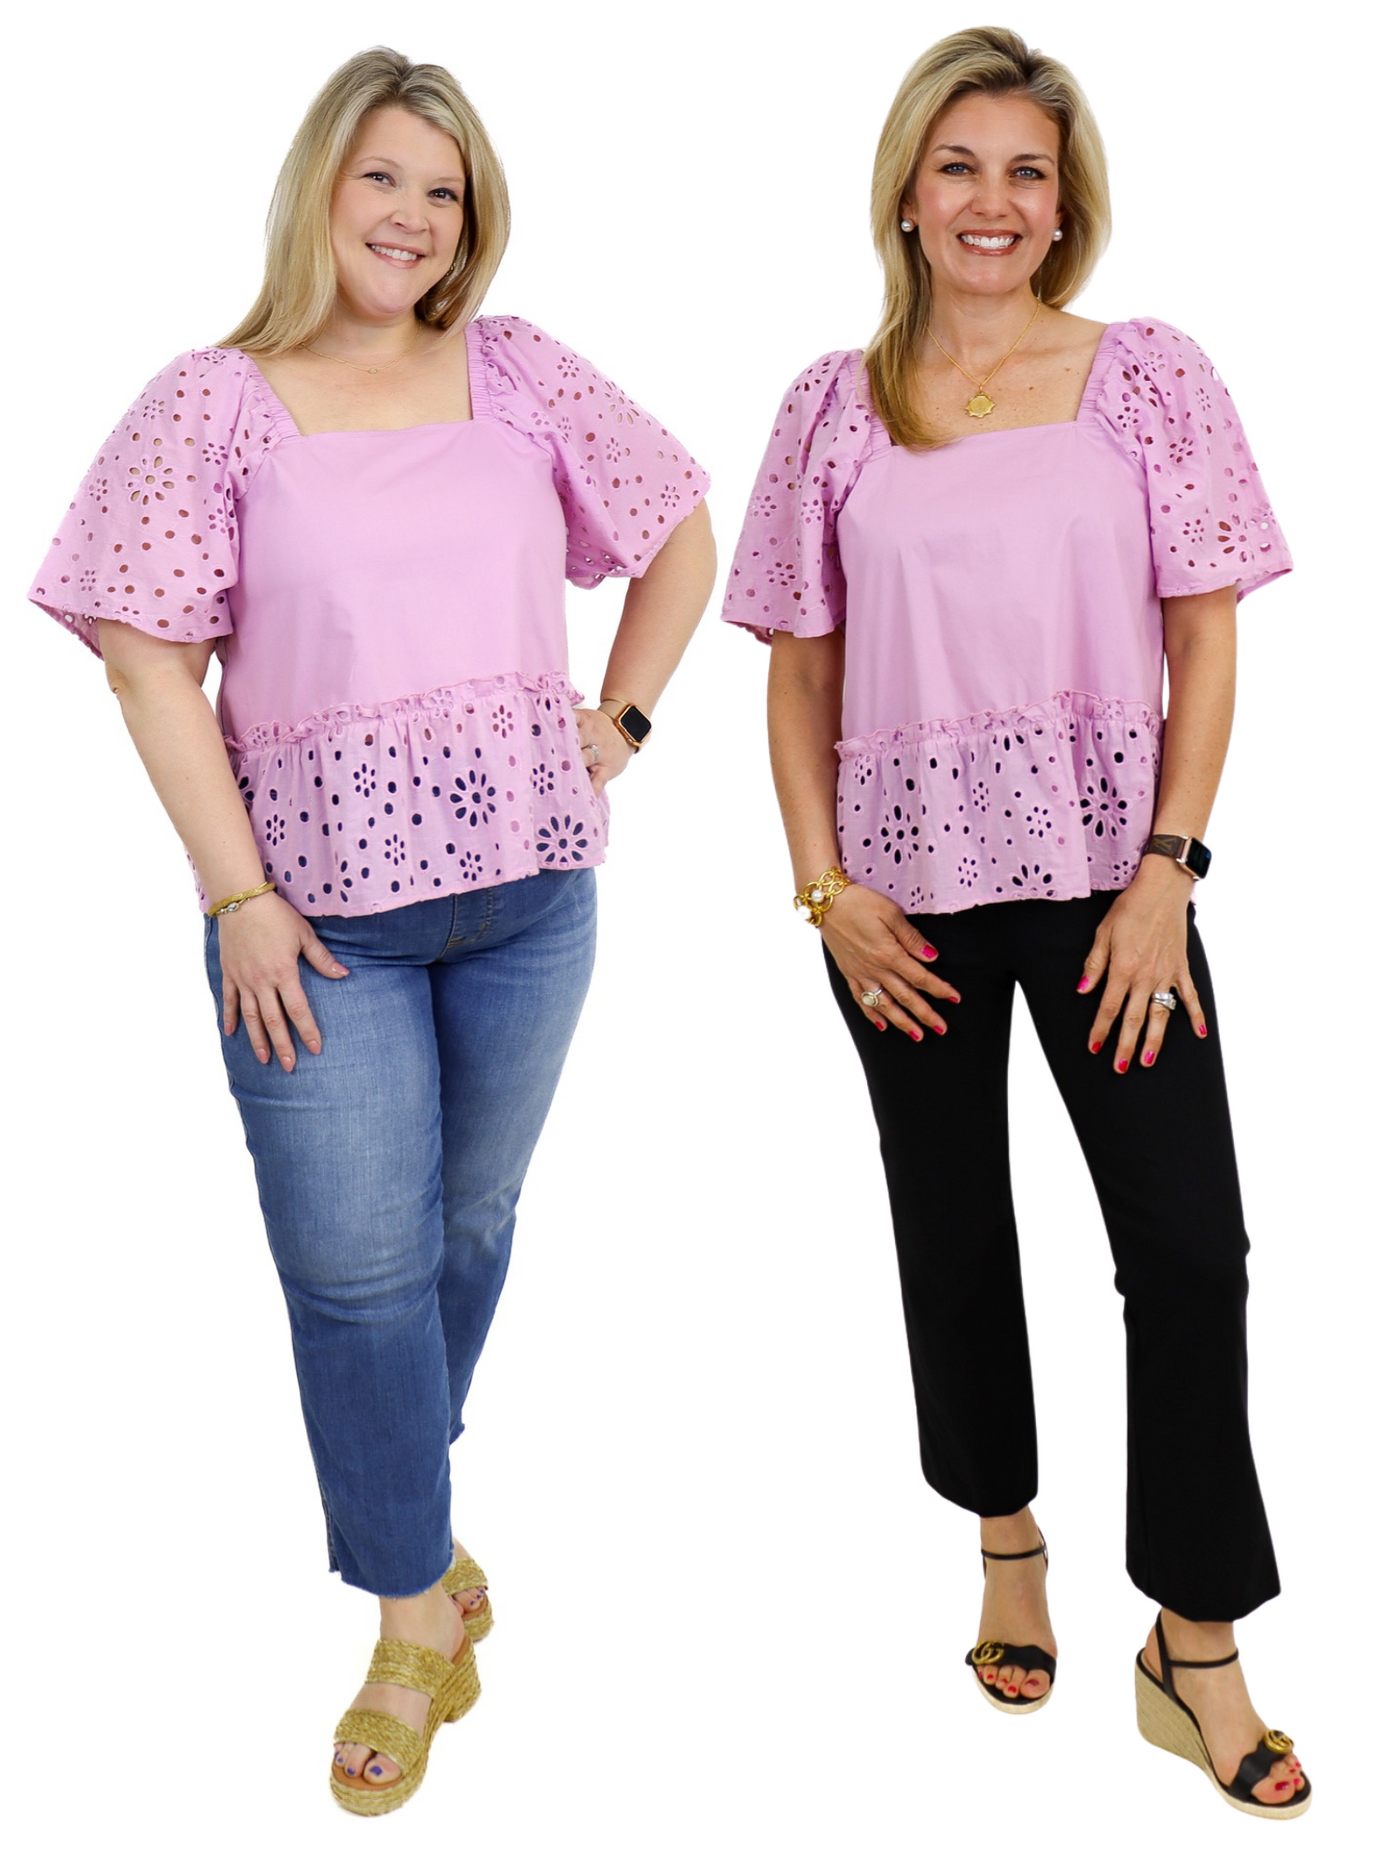 Mud Pie Eyelet Top - Lilac front view of size Large and Small.